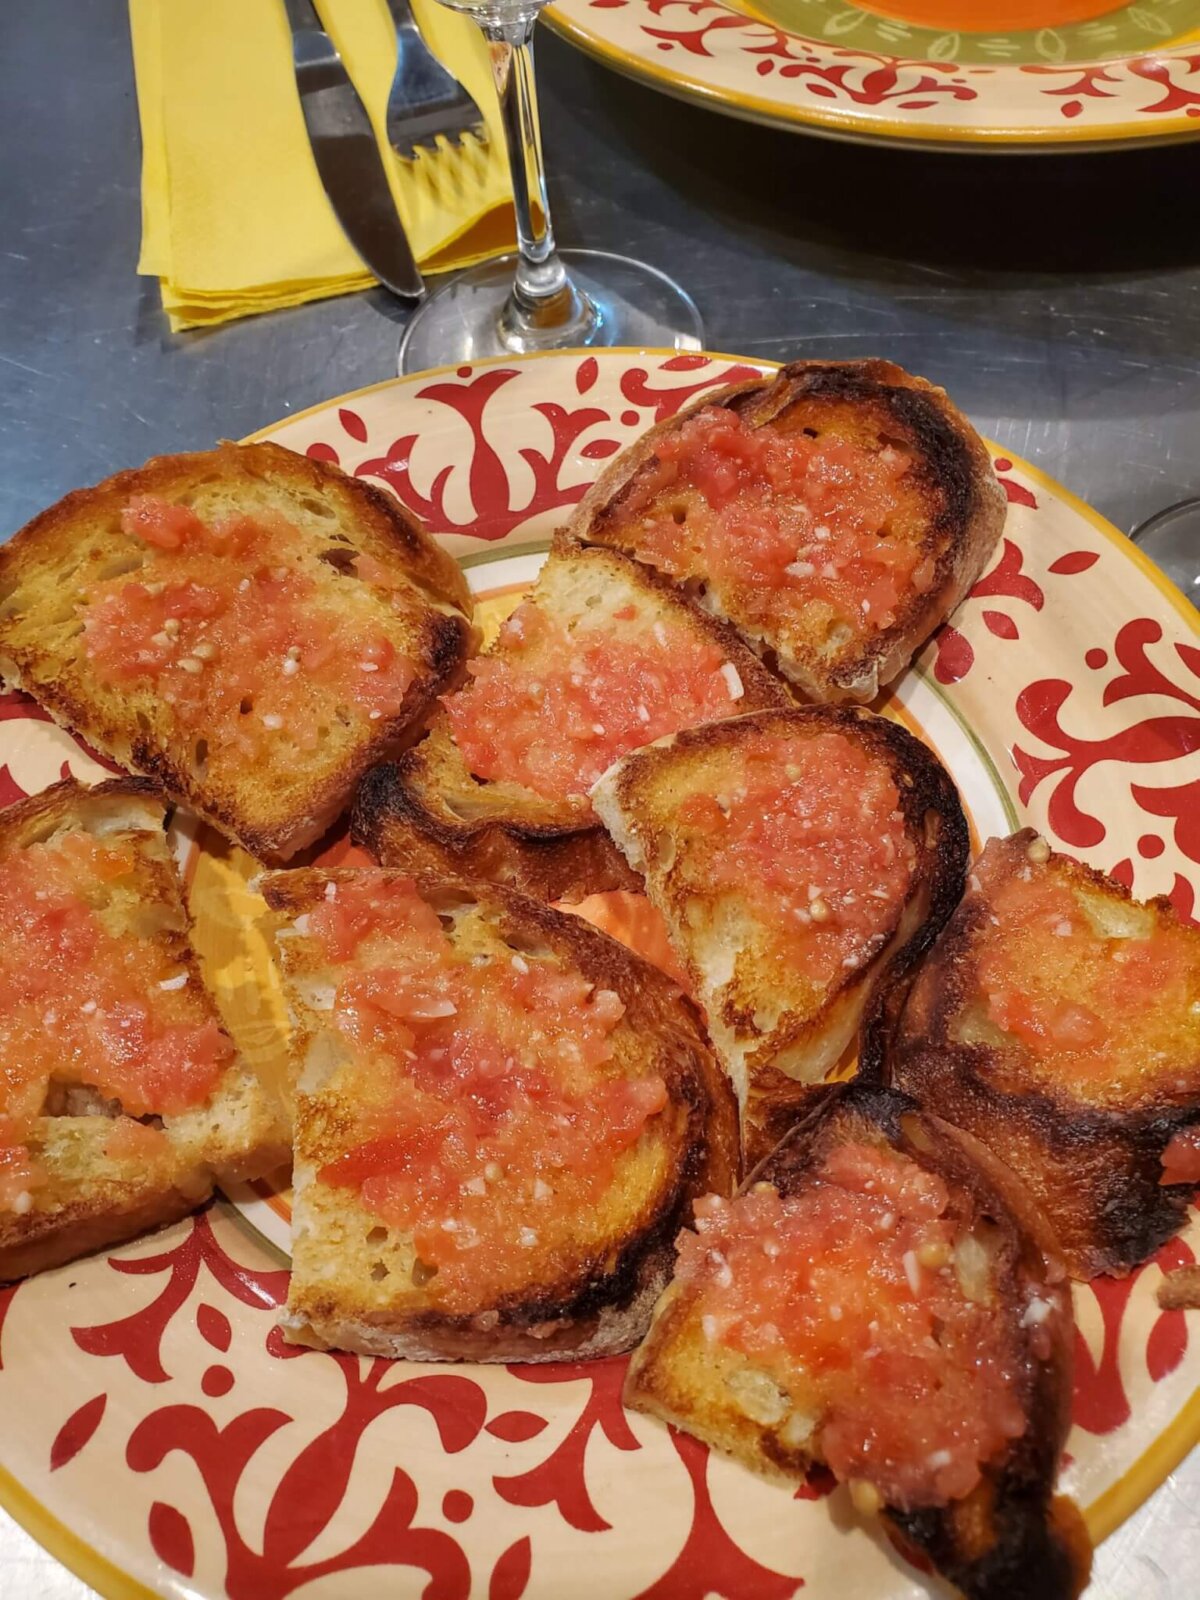 Pa amb tomàquet, is a traditional food of Catalan